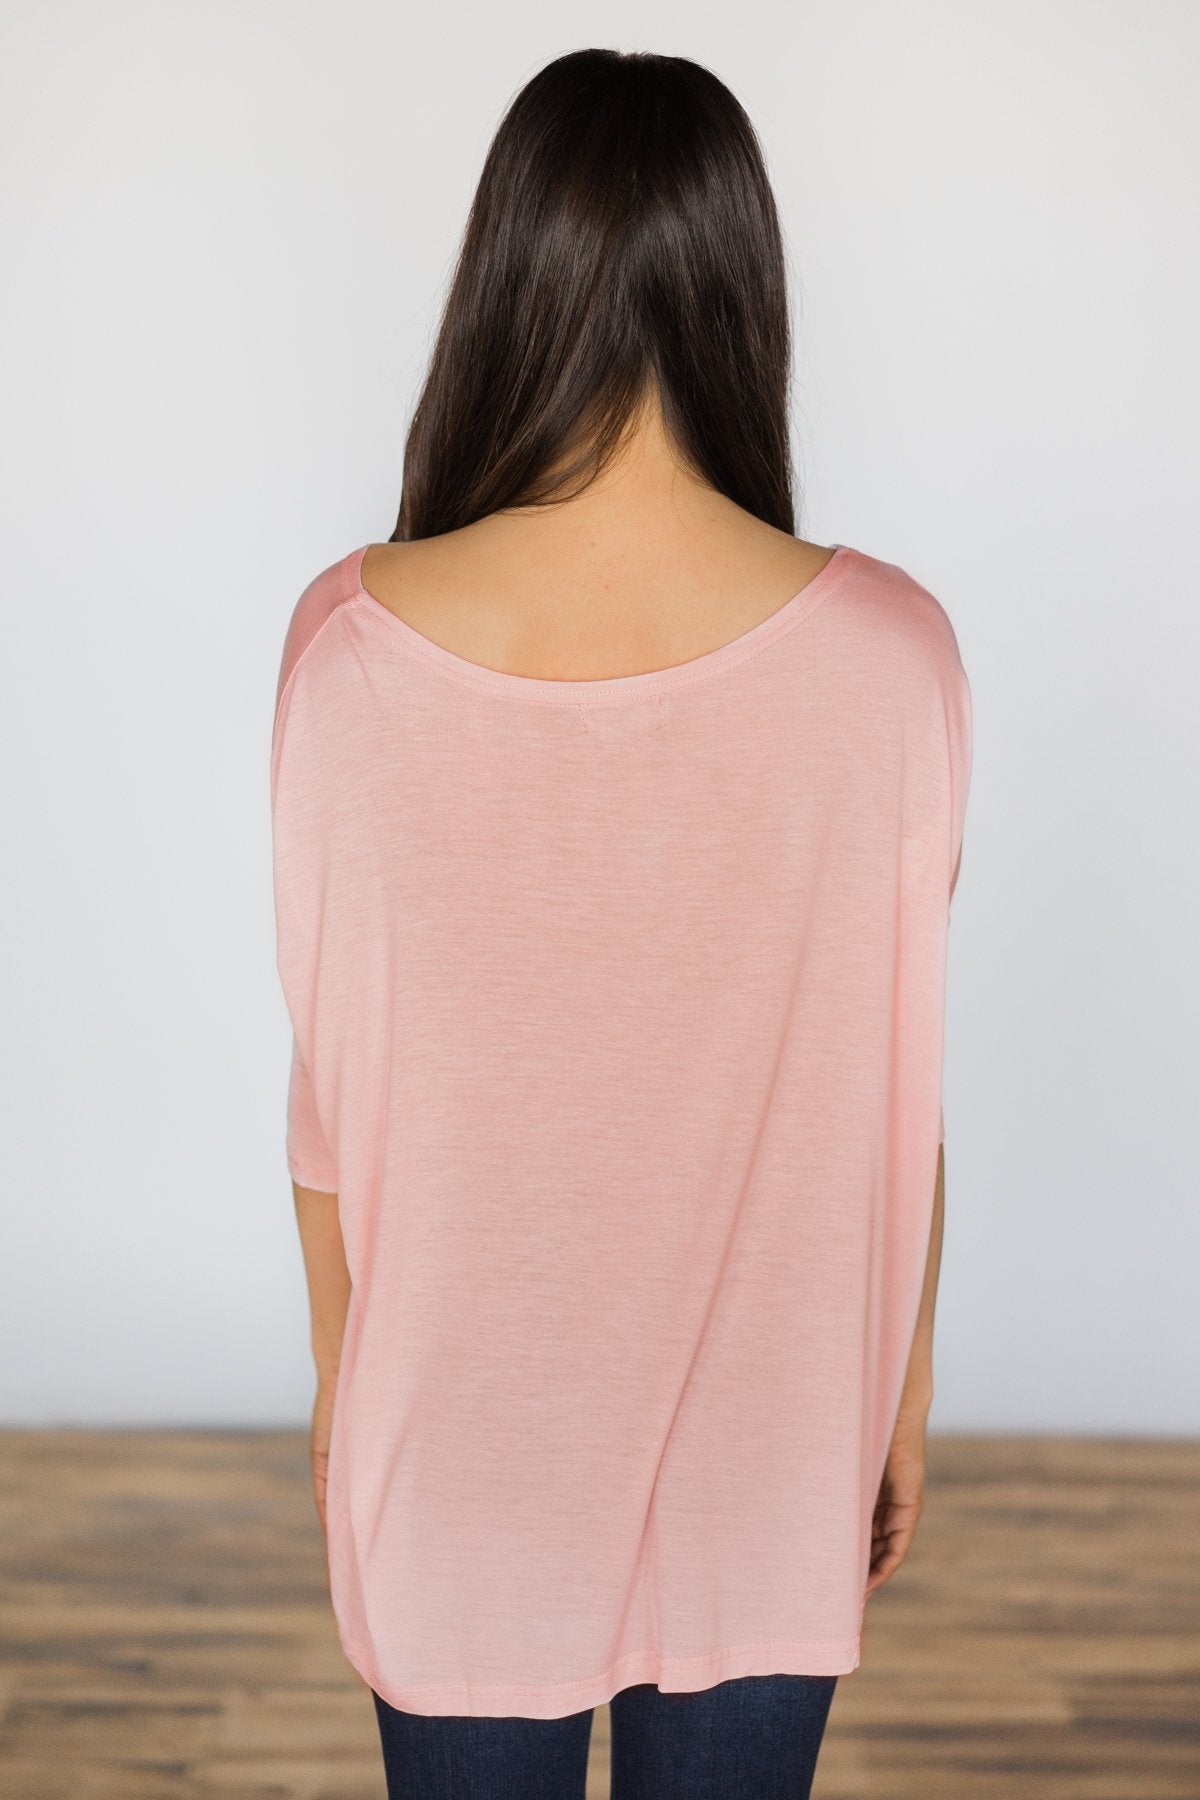 Your Everyday Casual Piko Top - Blush